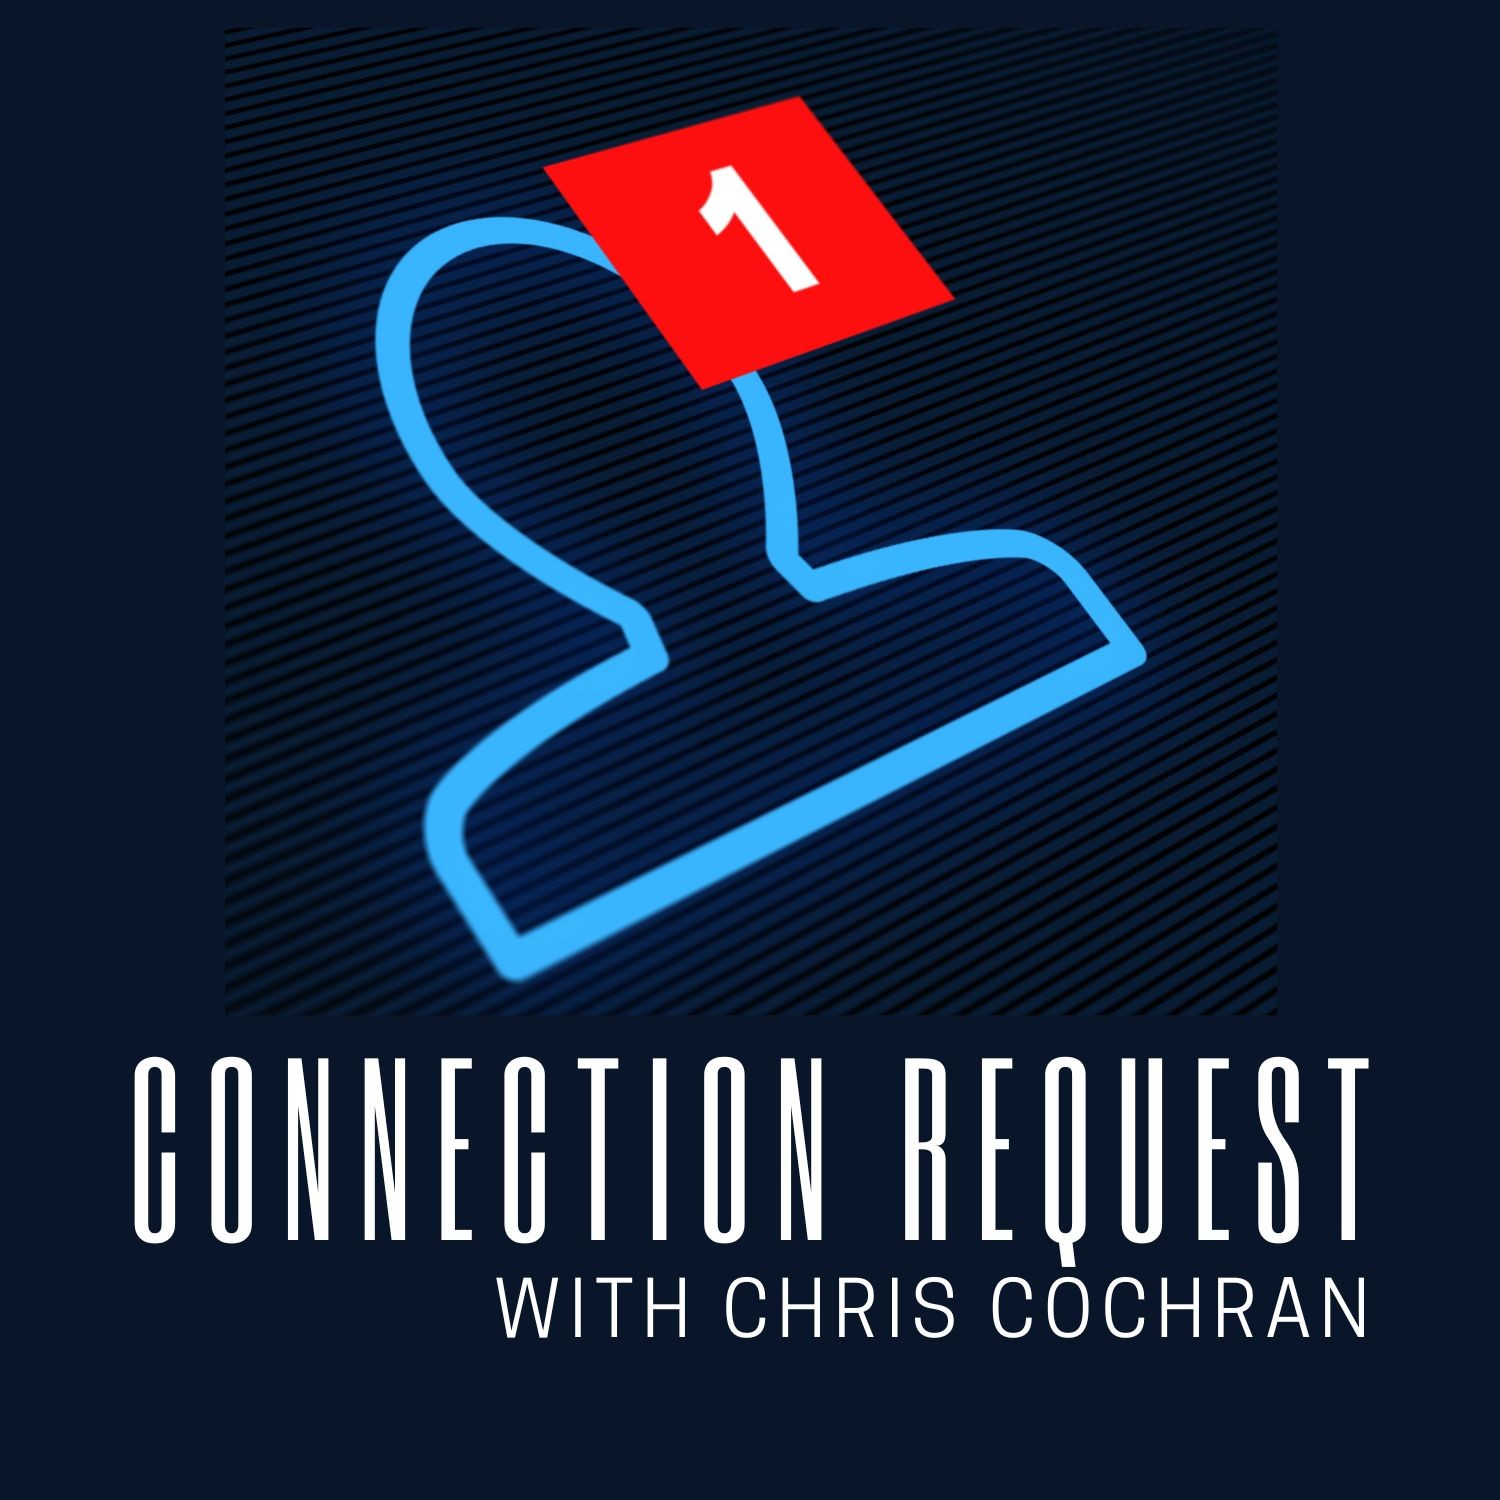 Connection Request with Chris Cochran